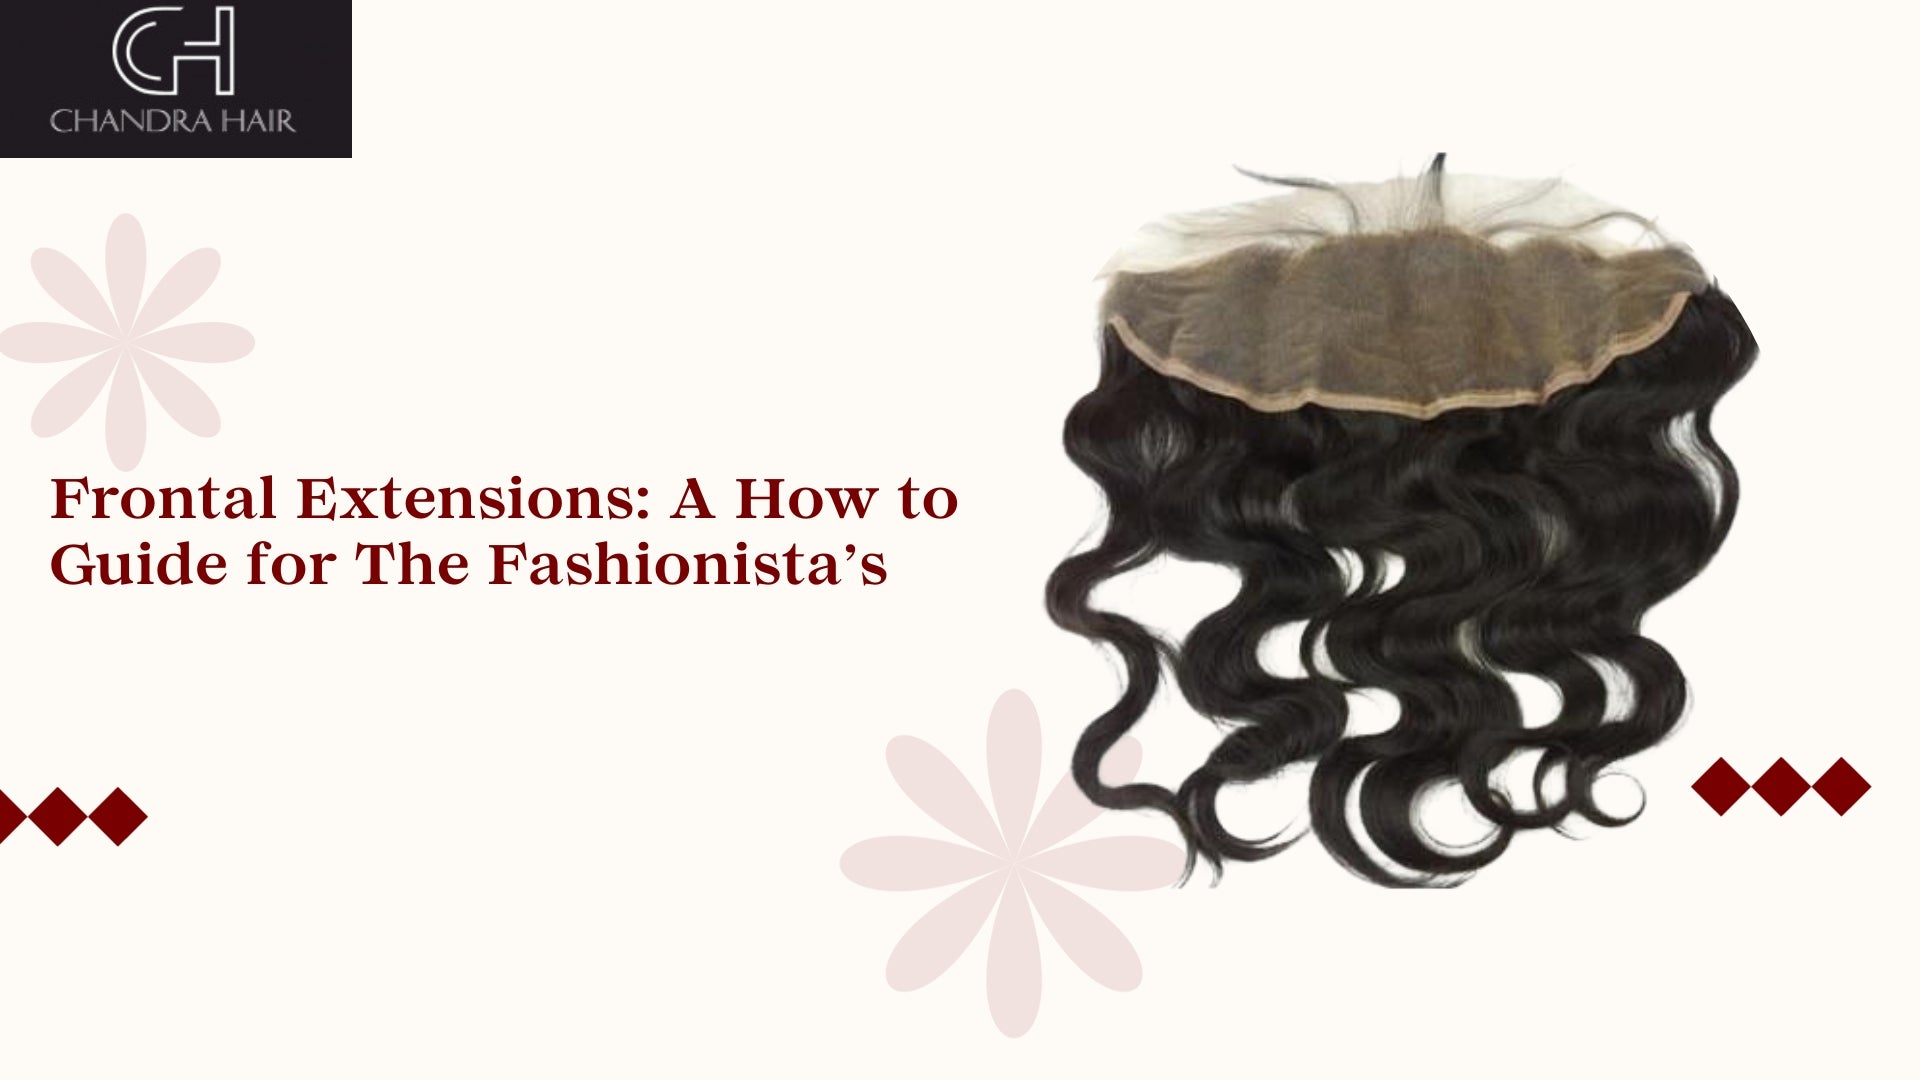 Frontal Extensions: A How to Guide for The Fashionista’s